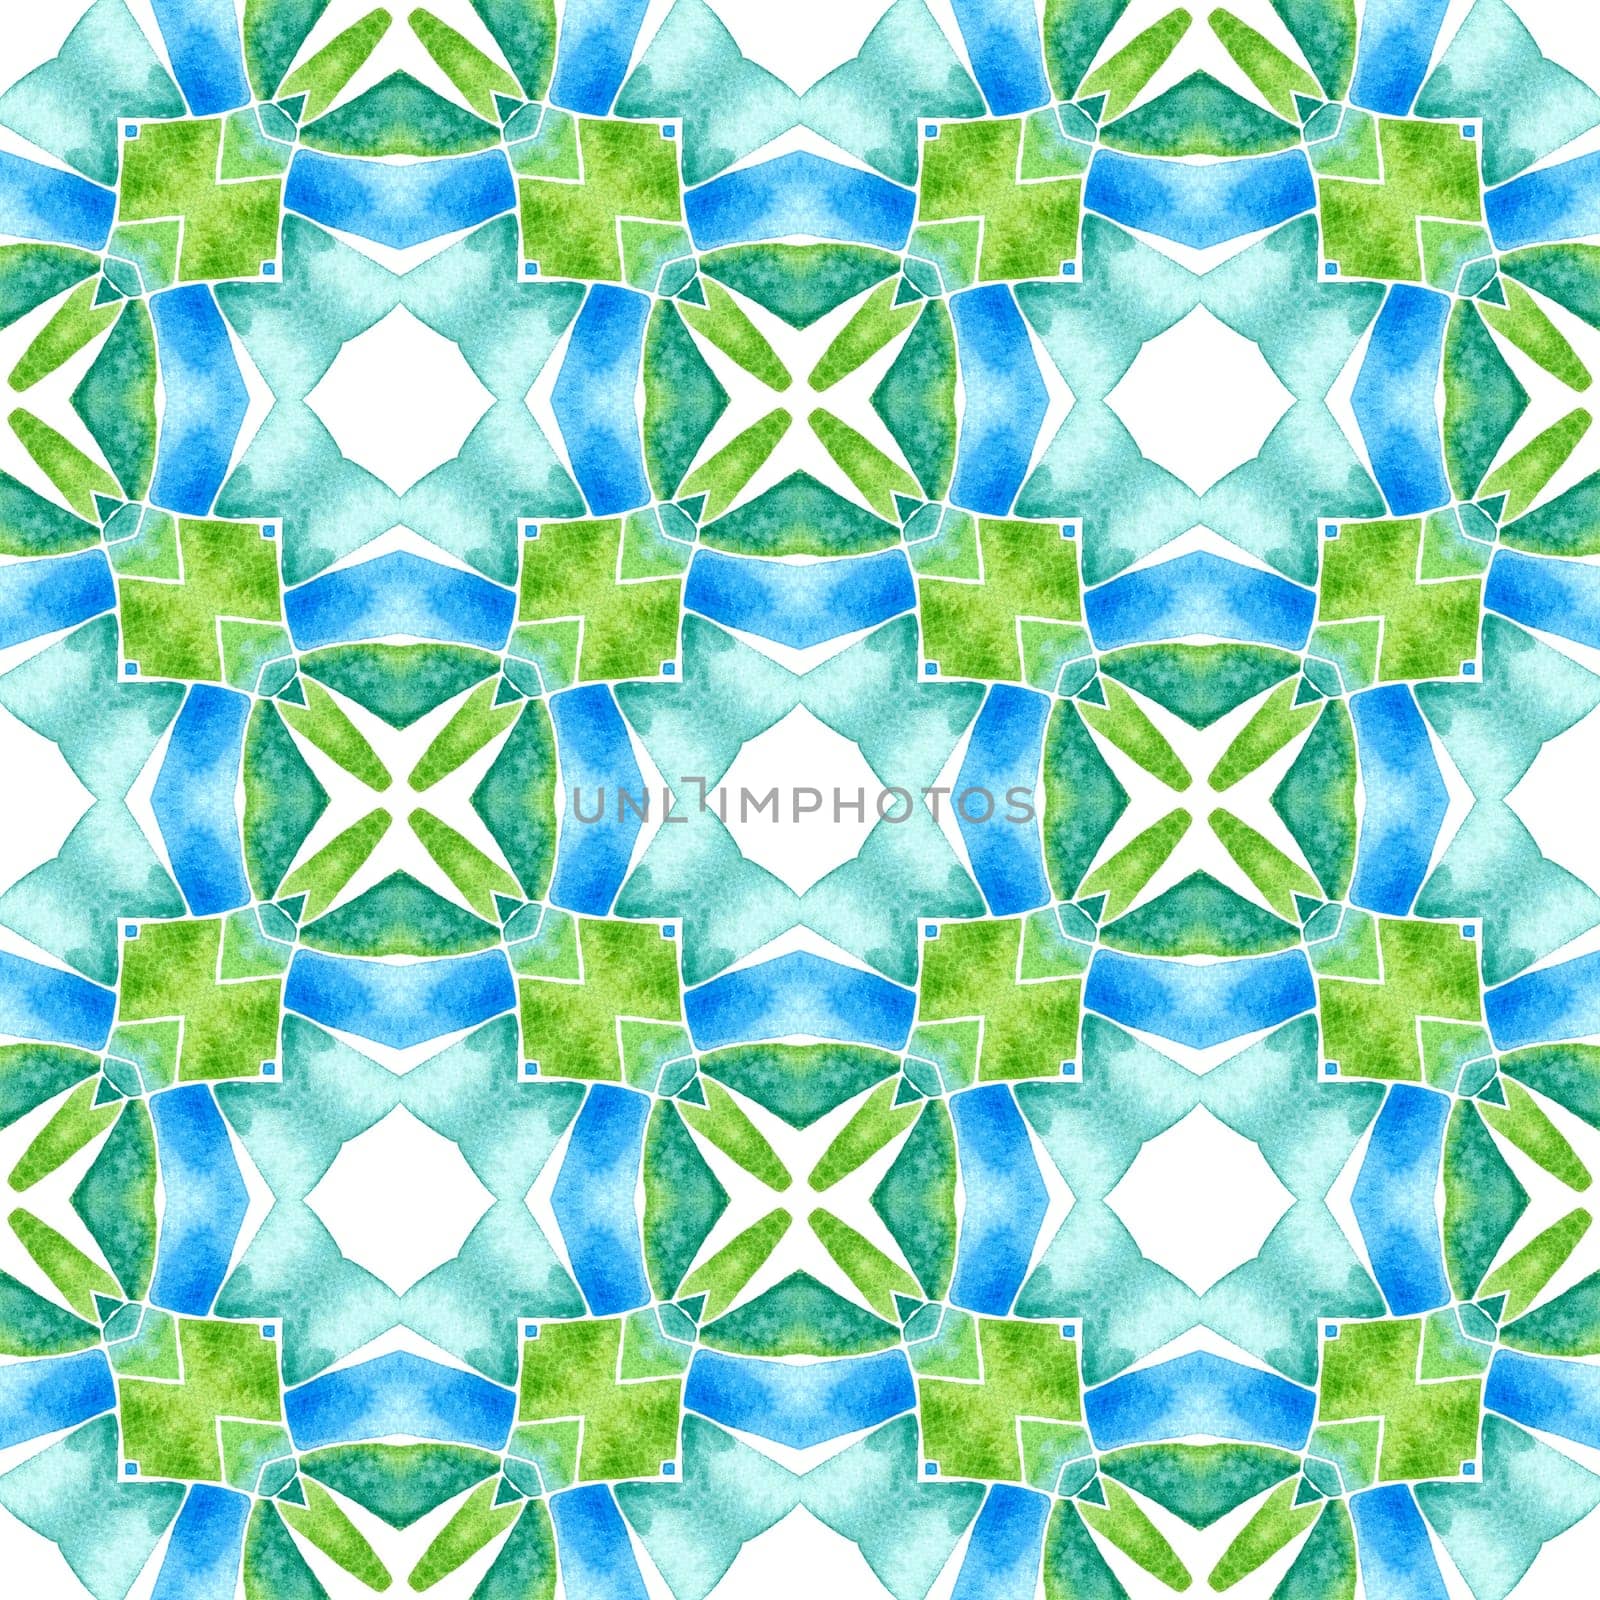 Textile ready tempting print, swimwear fabric, wallpaper, wrapping. Green shapely boho chic summer design. Exotic seamless pattern. Summer exotic seamless border.